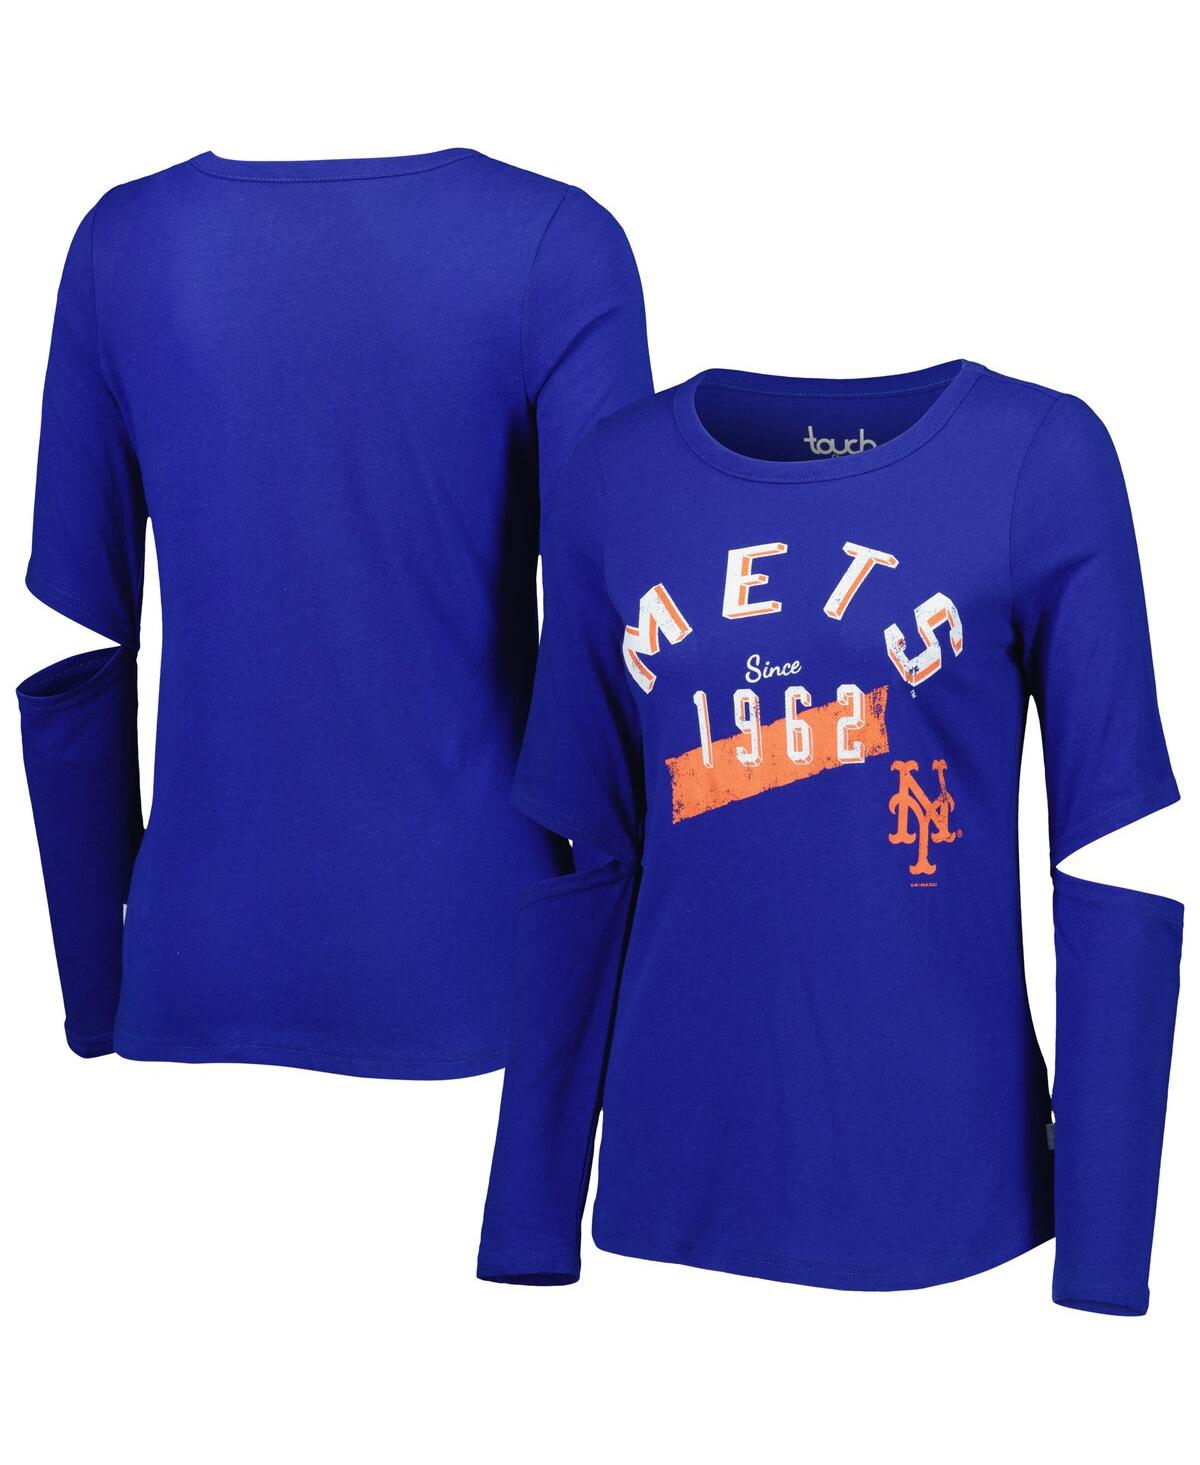 Women's Touch Royal New York Mets Formation Long Sleeve T-shirt - Royal